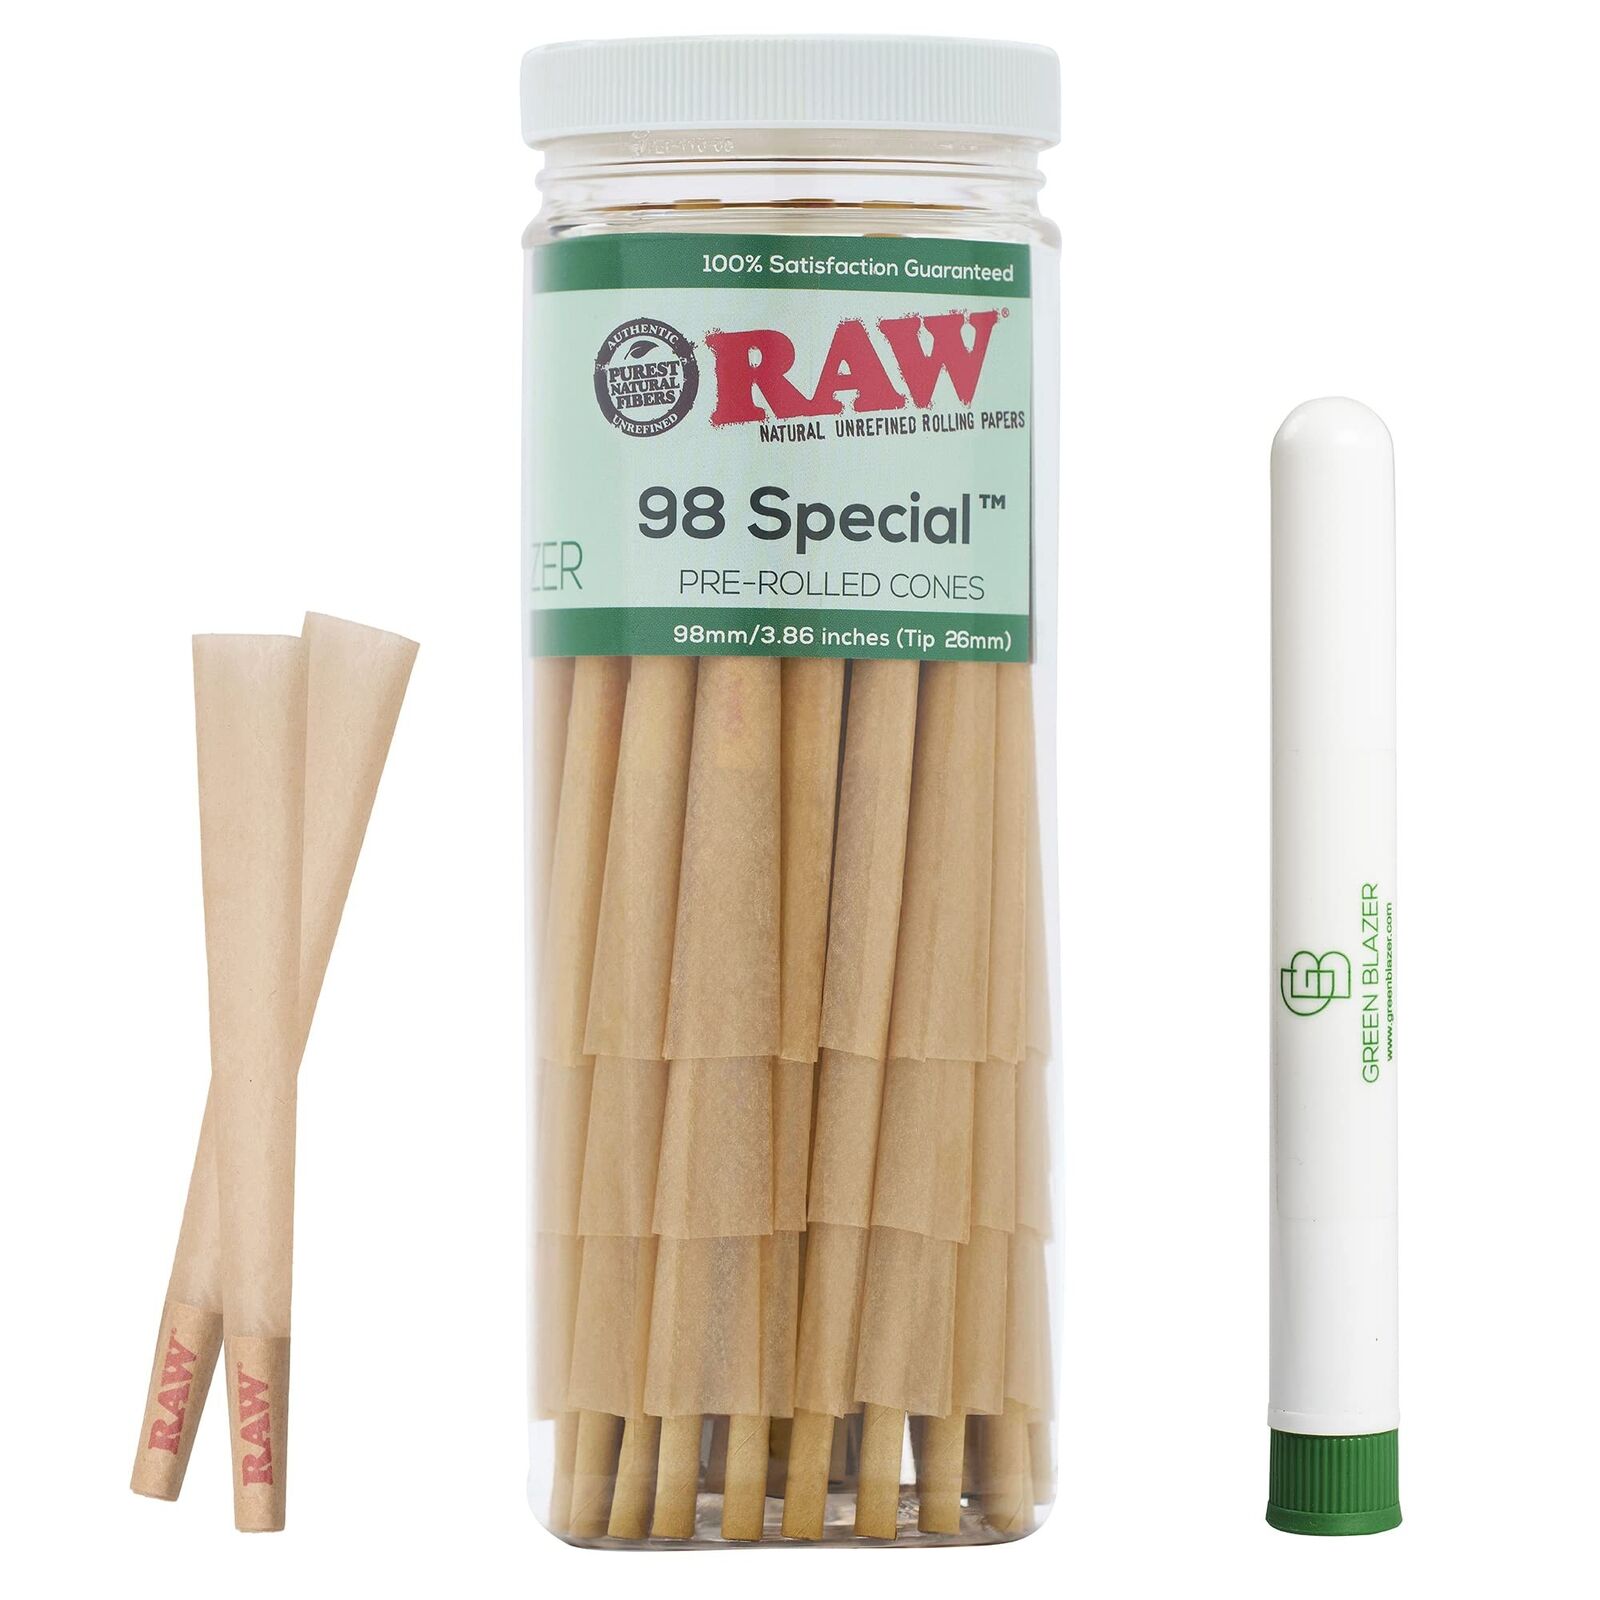 RAW Cones 98 Special - 50 Pack